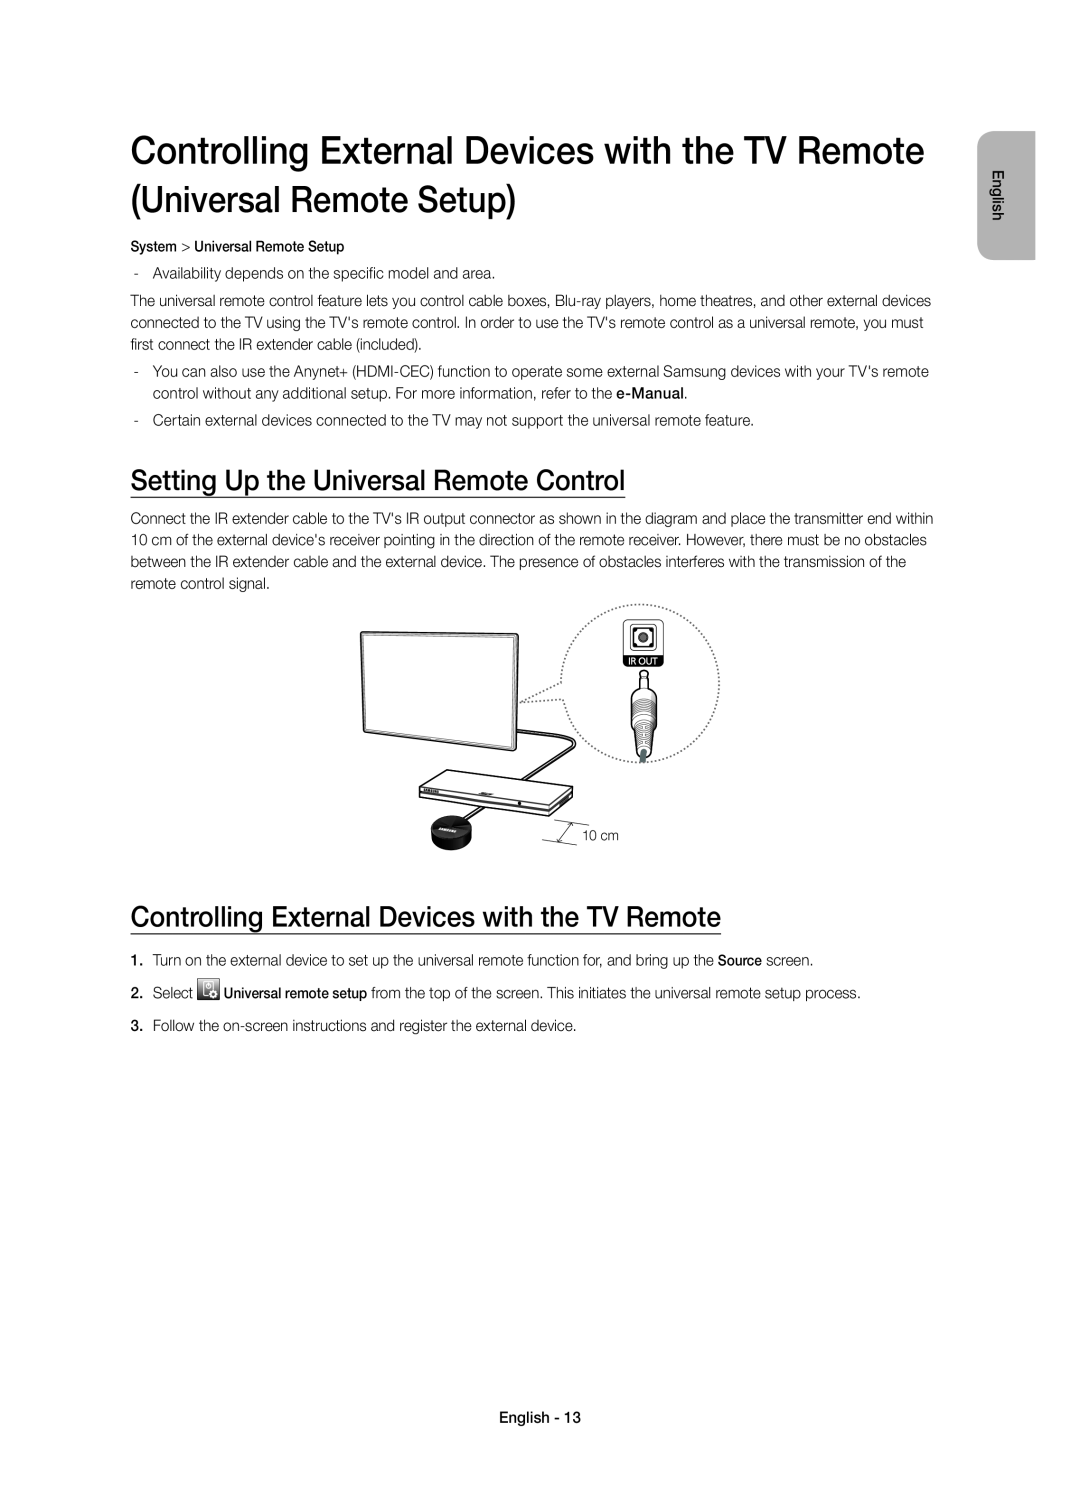 Samsung UE40H5303AWXXN manual Setting Up the Universal Remote Control, Controlling External Devices with the TV Remote 